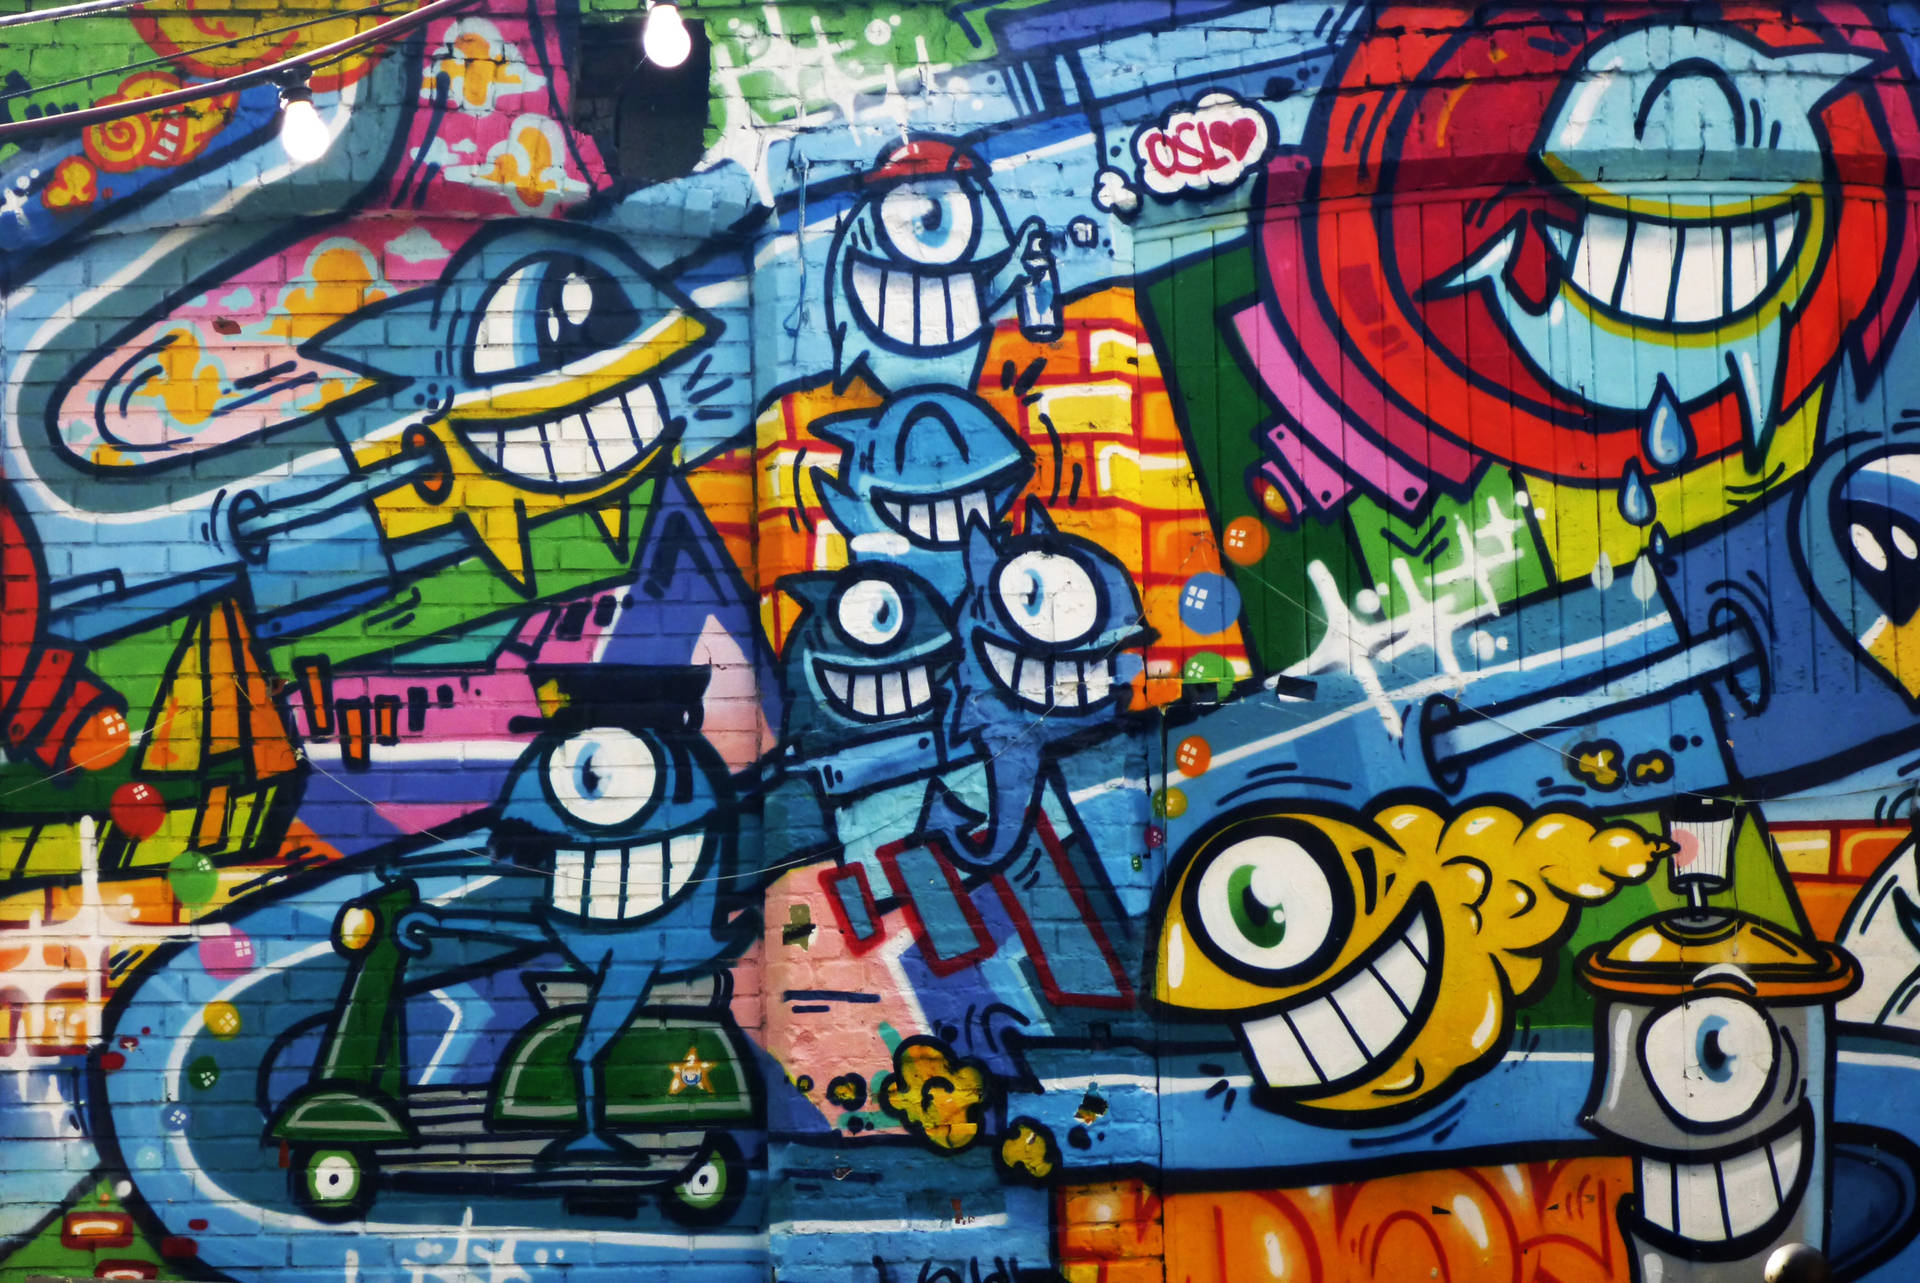 Cryptic Creatures Come Alive In This Vibrant Graffiti. Background